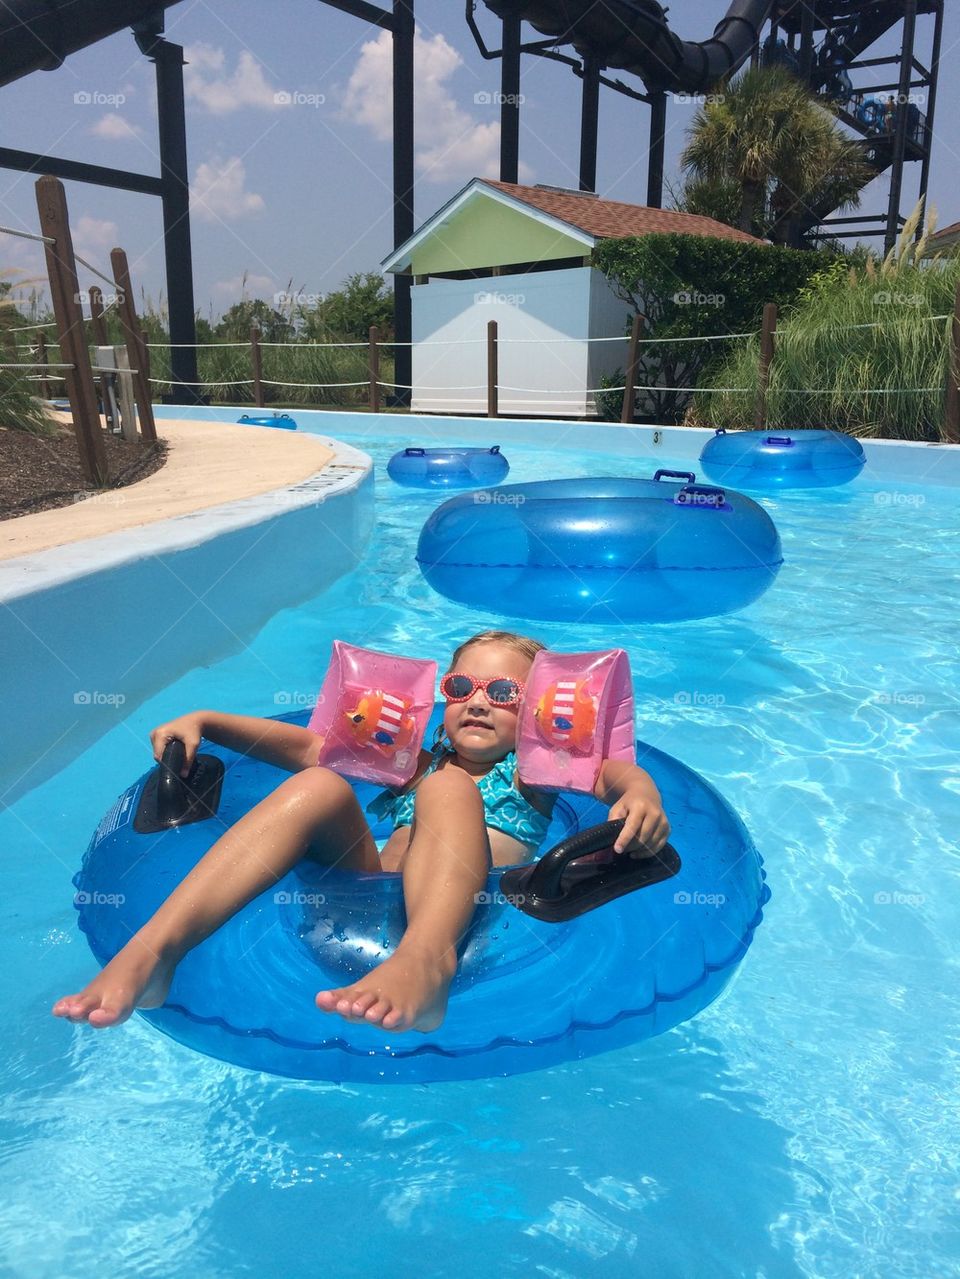 Being lazy on the lazy river